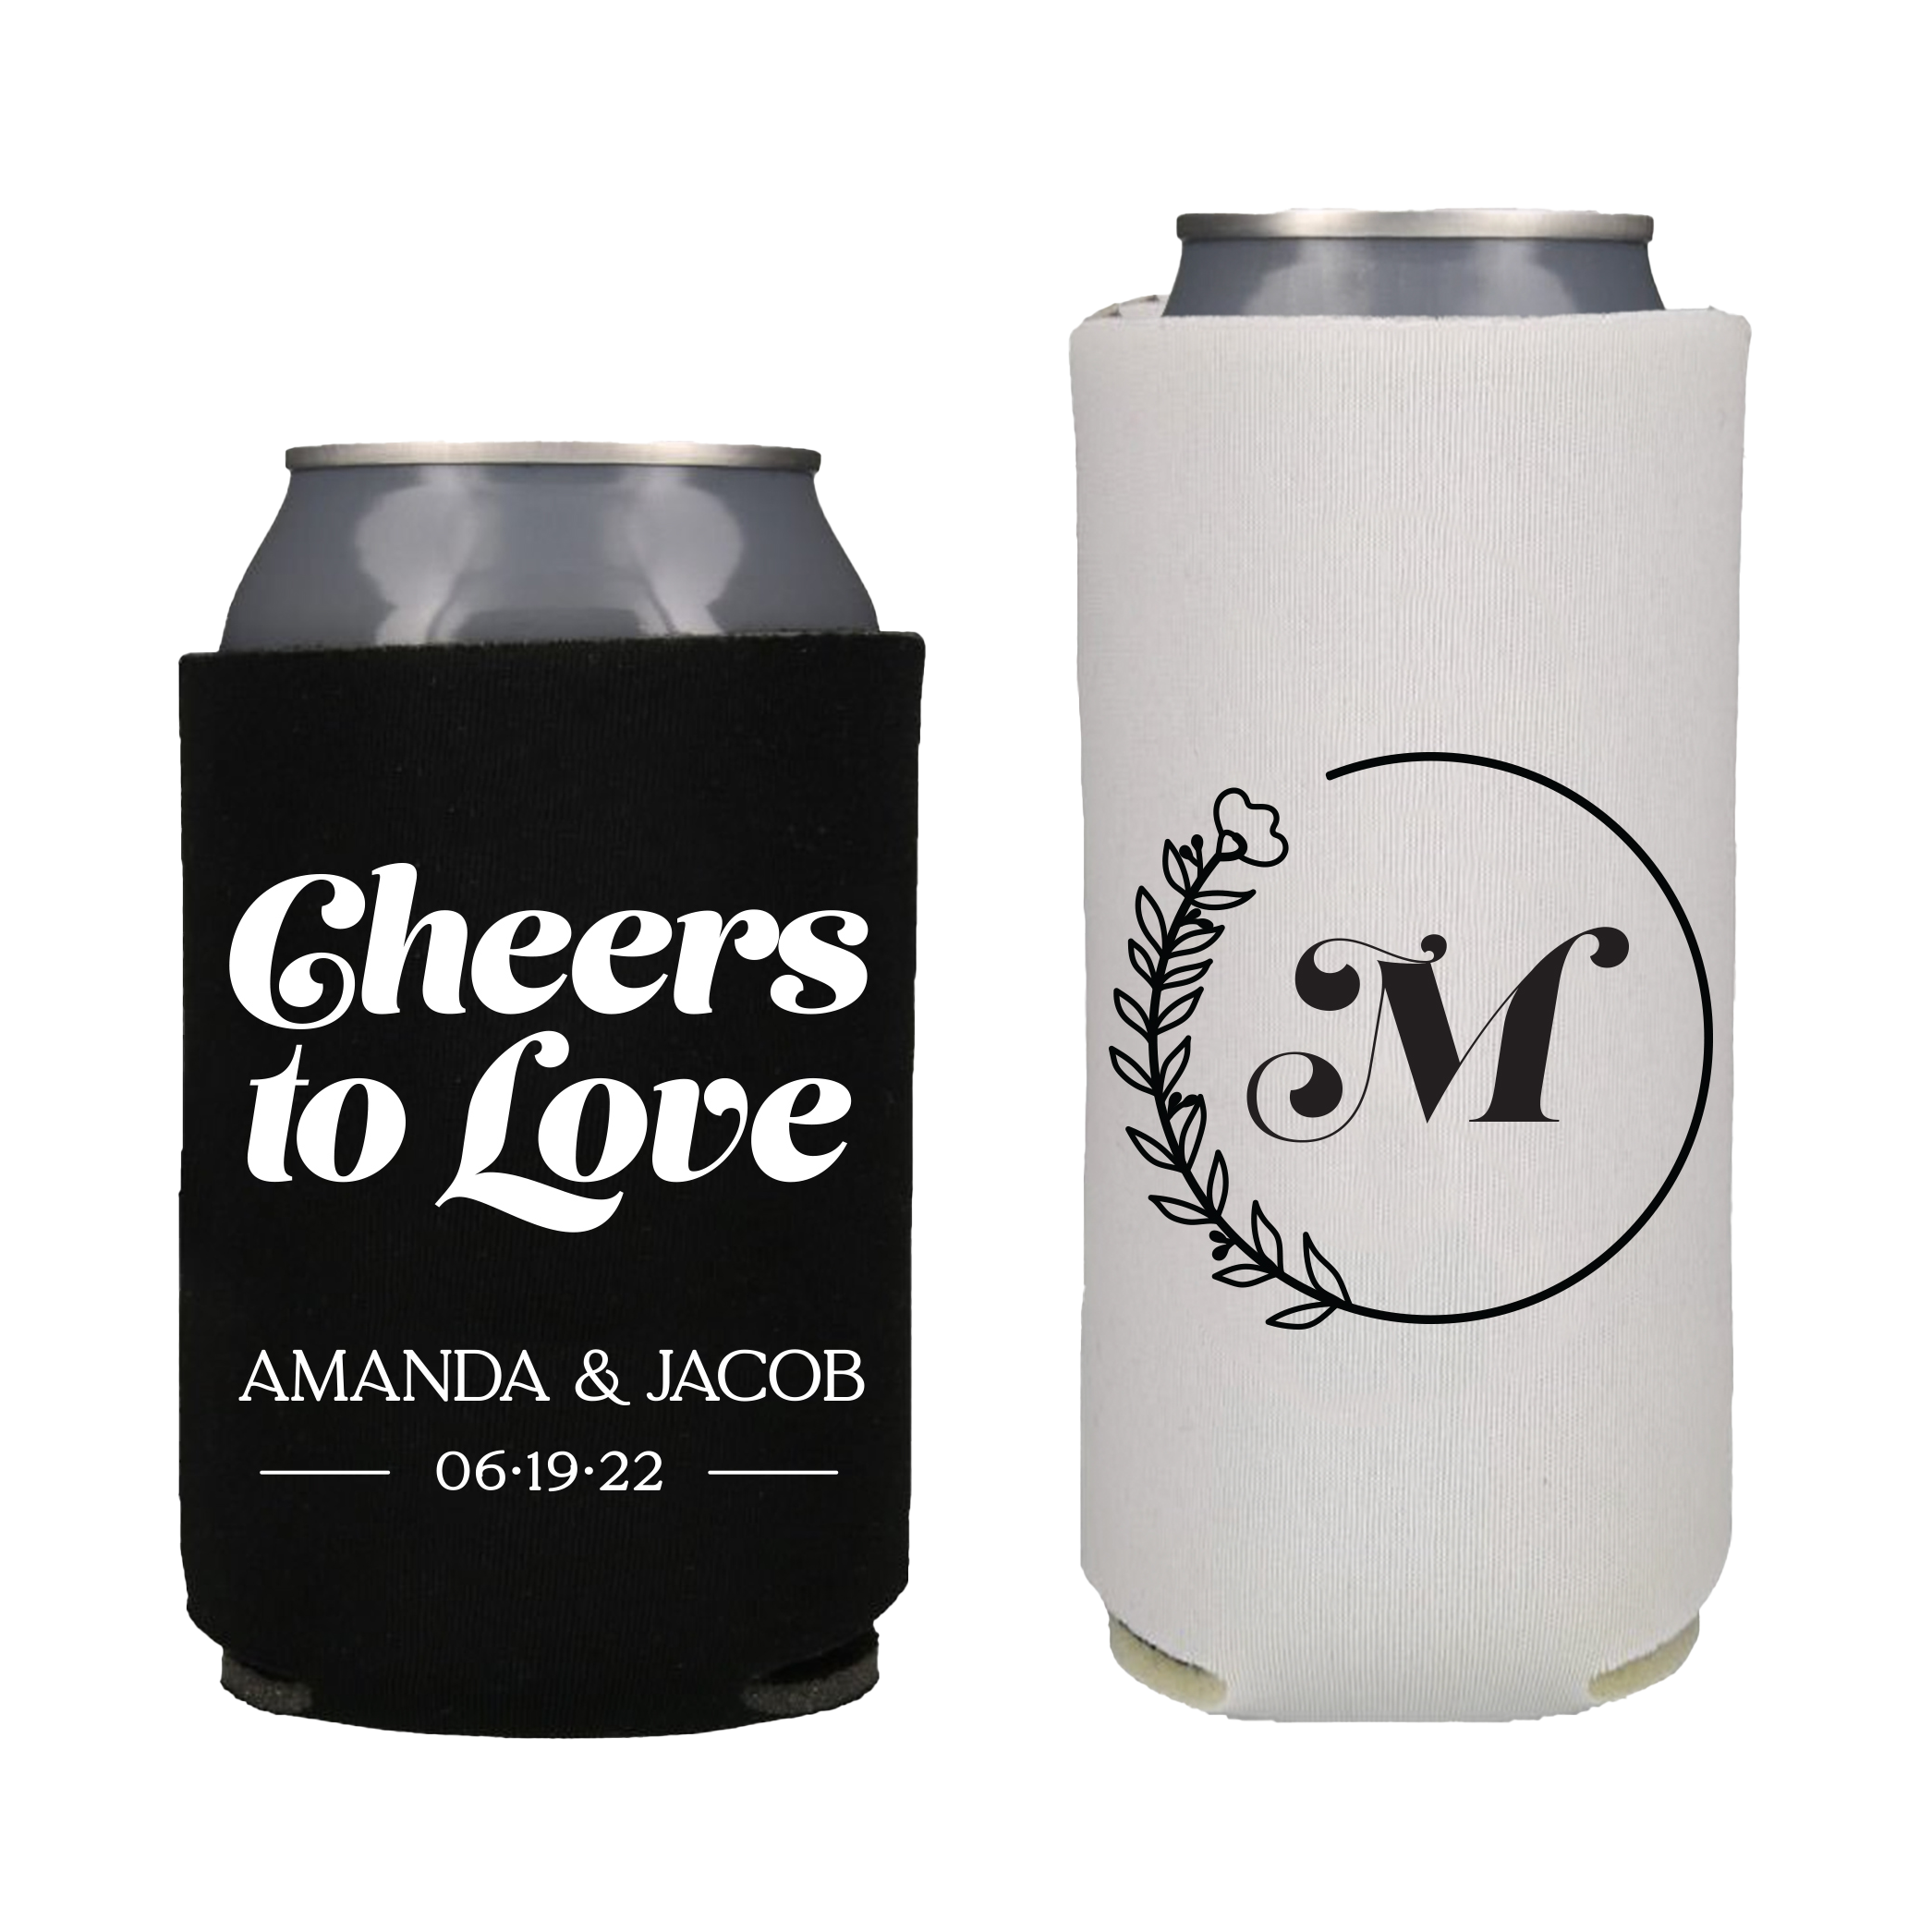 wedding can cooler bundle with a black standard koozie and a white slim koozie, design is Cheers to Love